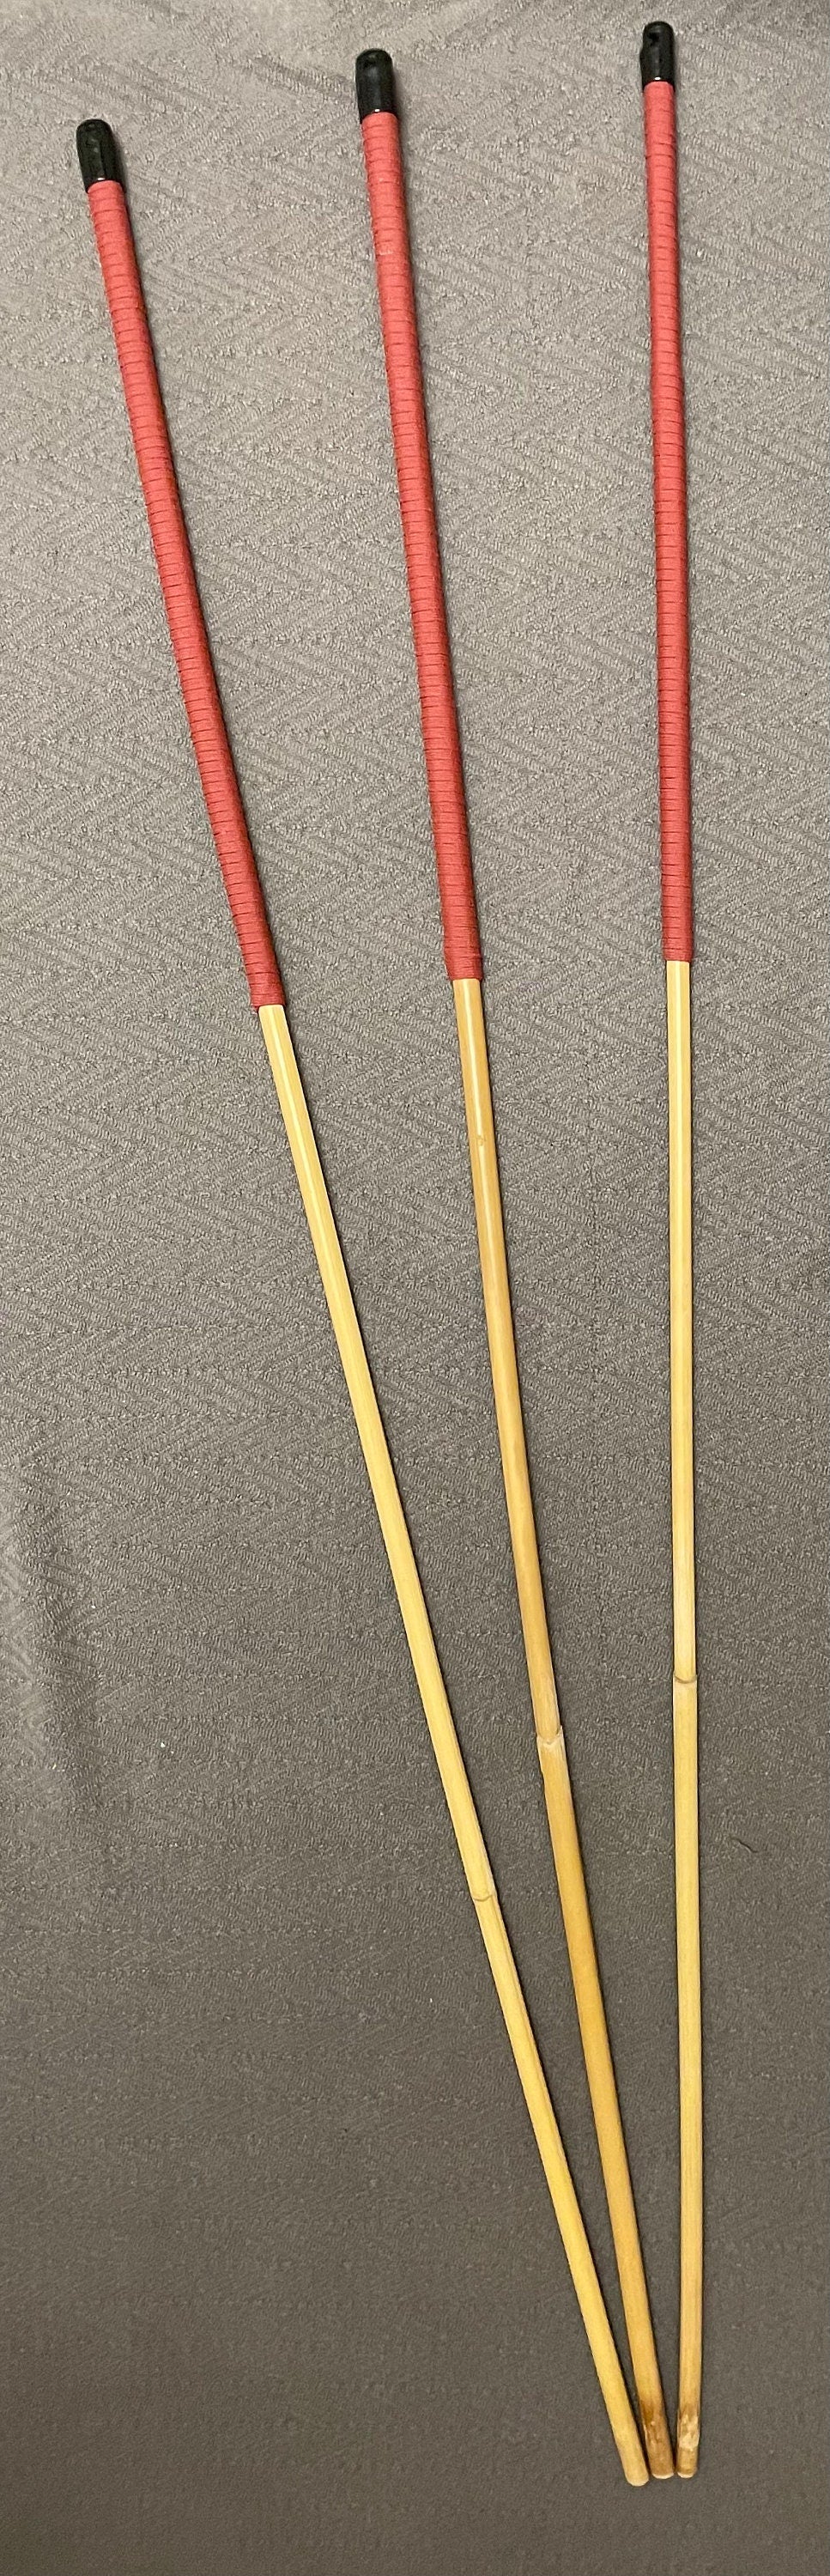  Miss Stripewell's English Discipline Trio Classic Dragon Canes / Punishment Canes / BDSM Canes Set of 3  - 102 to 105 cms L - Red Handles - Englishvice Canes